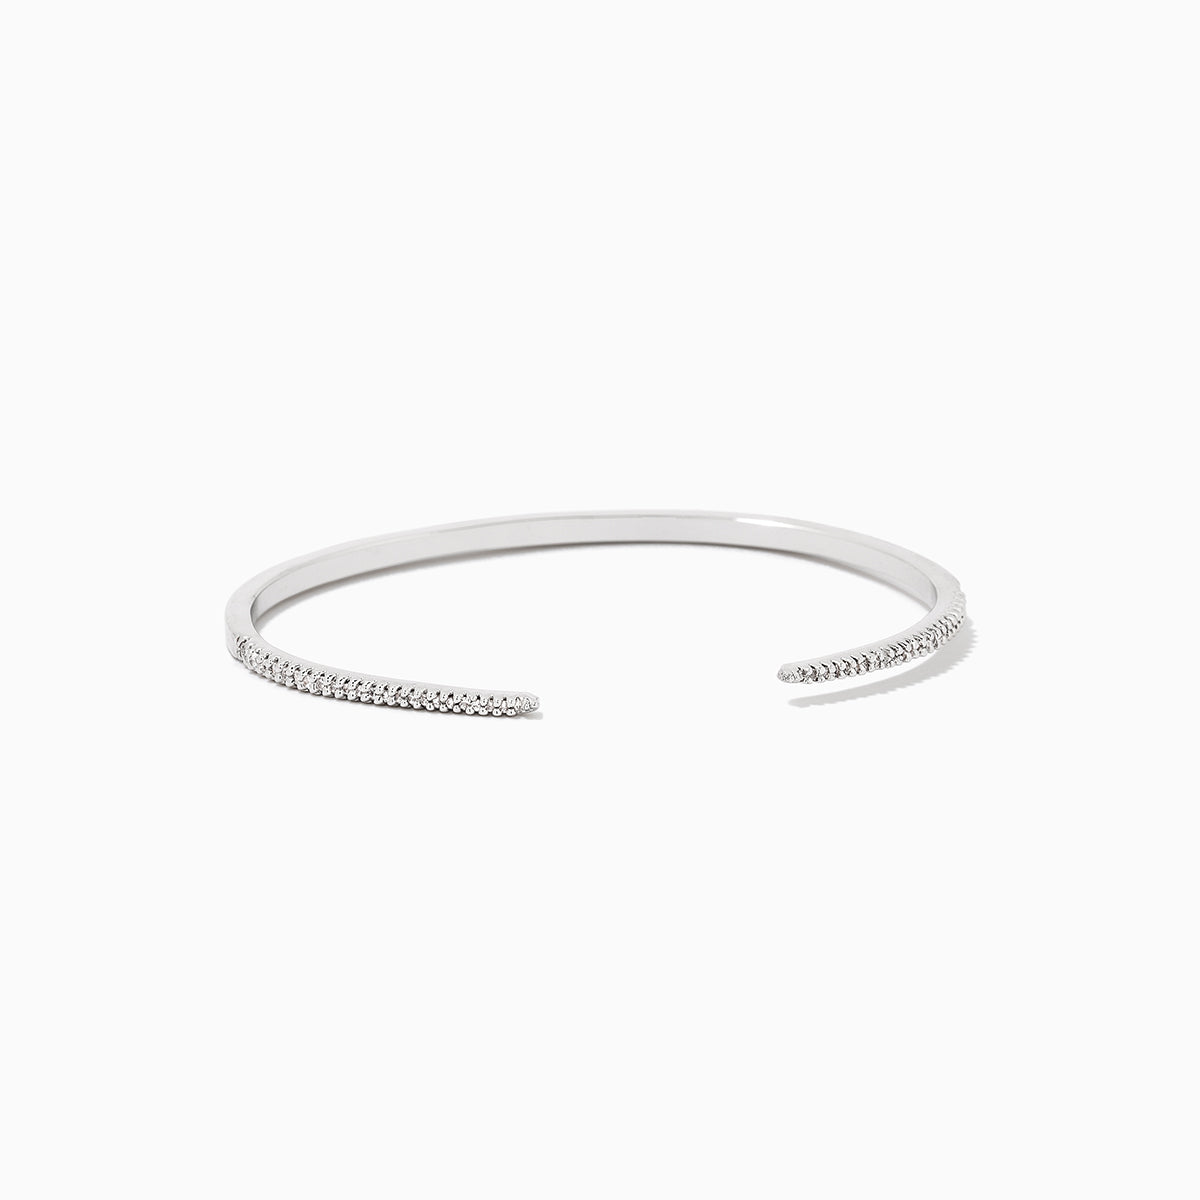 Wild Nights Open Cuff Bracelet in Silver and Gold | Uncommon James